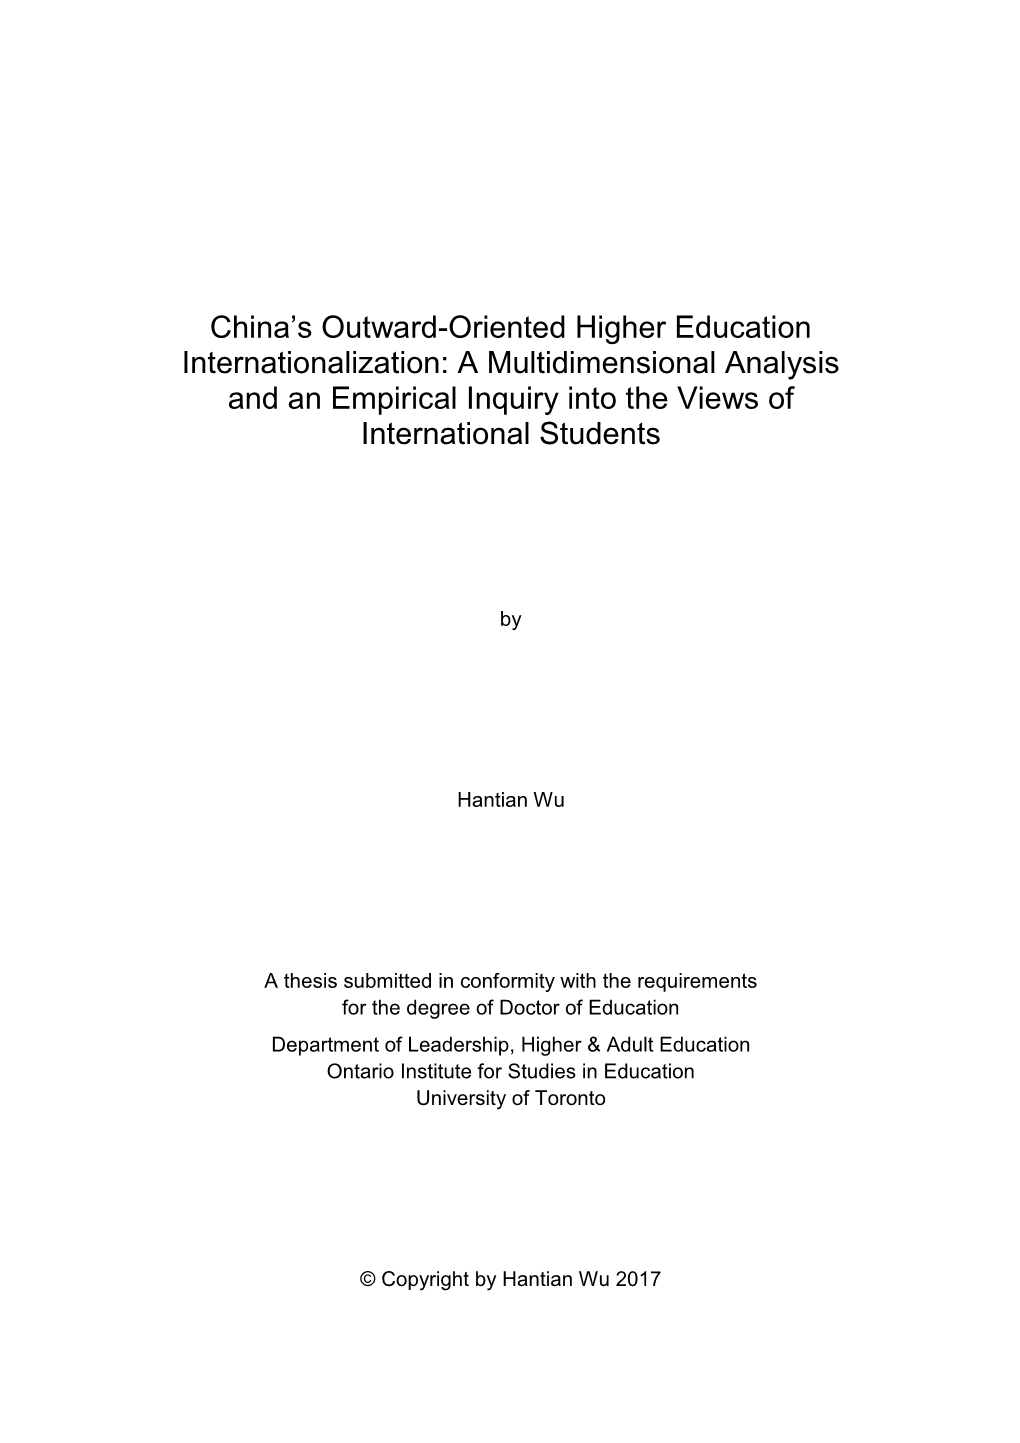 China's Outward-Oriented Higher Education Internationalization